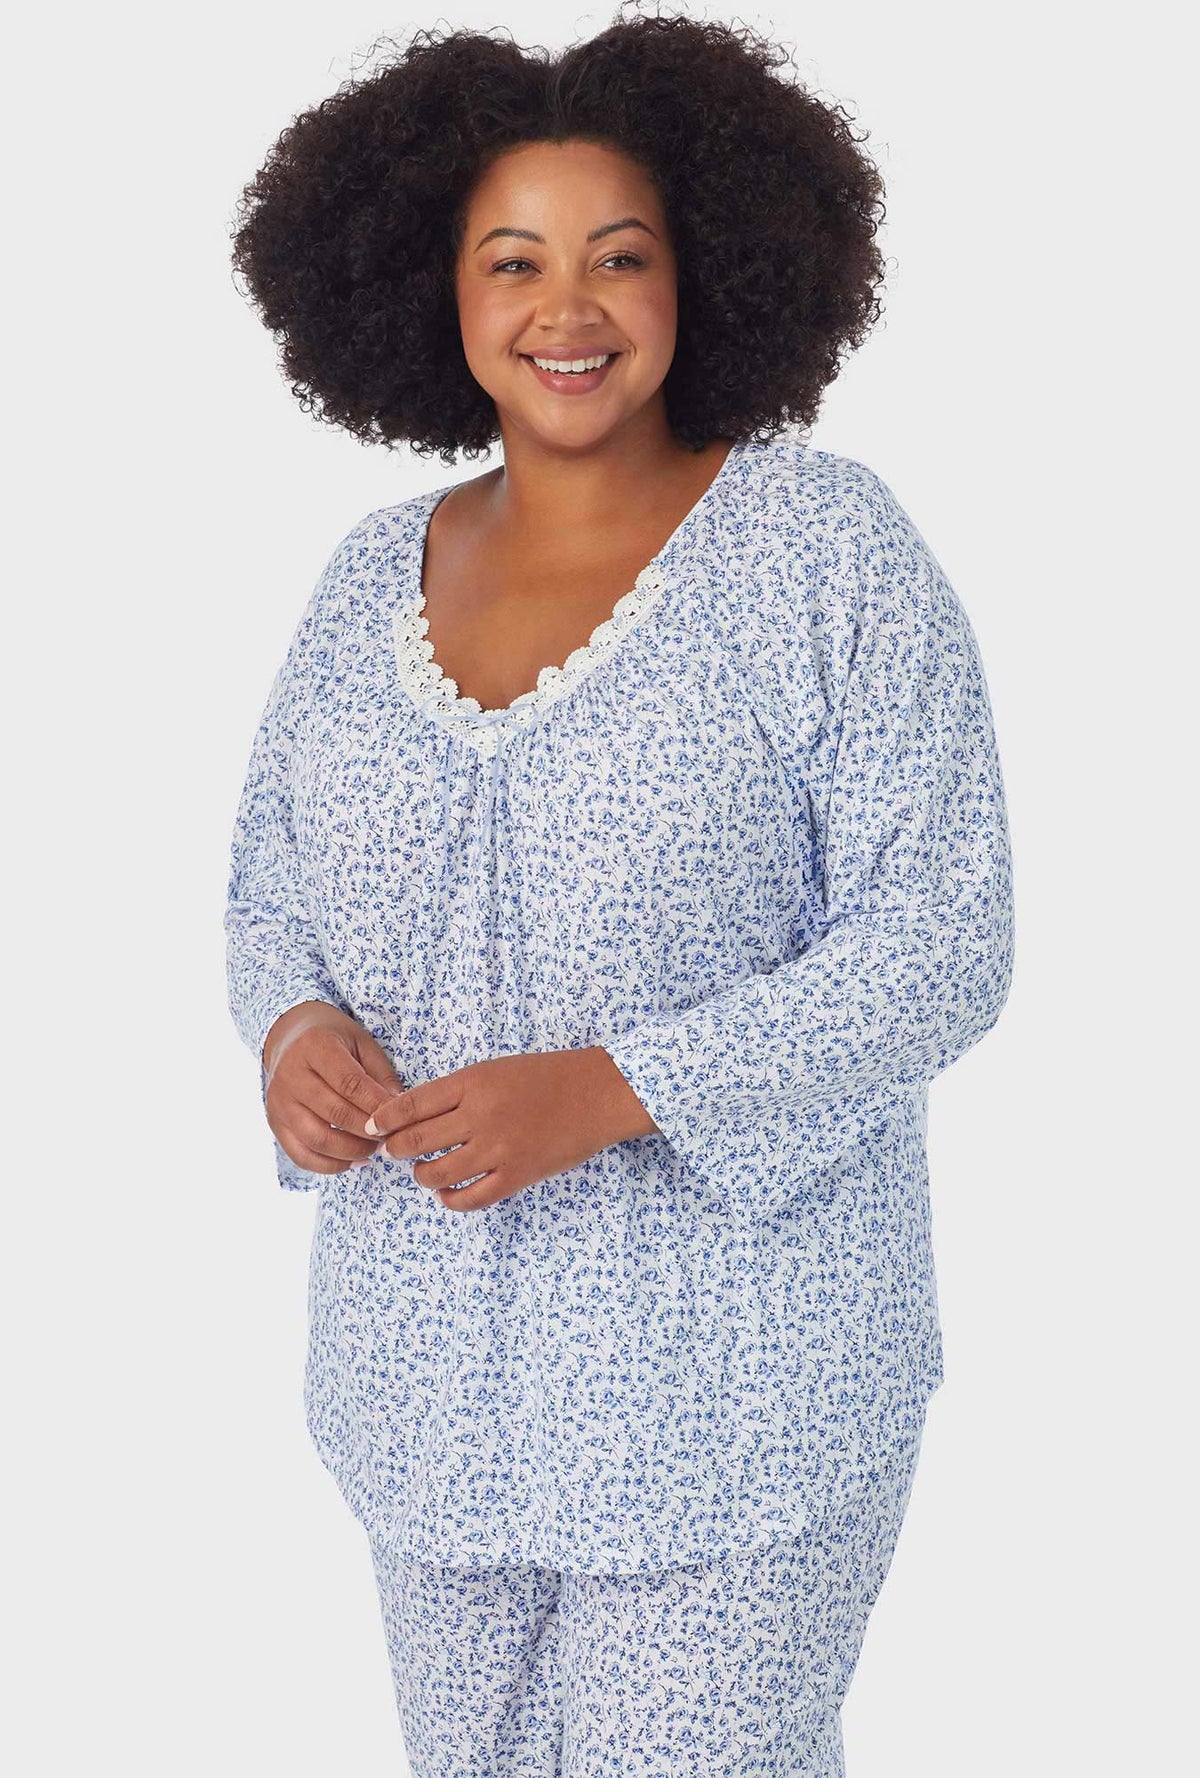 A lady wearing white Long Sleeve 3/4 Sleeve Long Pant plus size PJ Set with Dusty Blue print